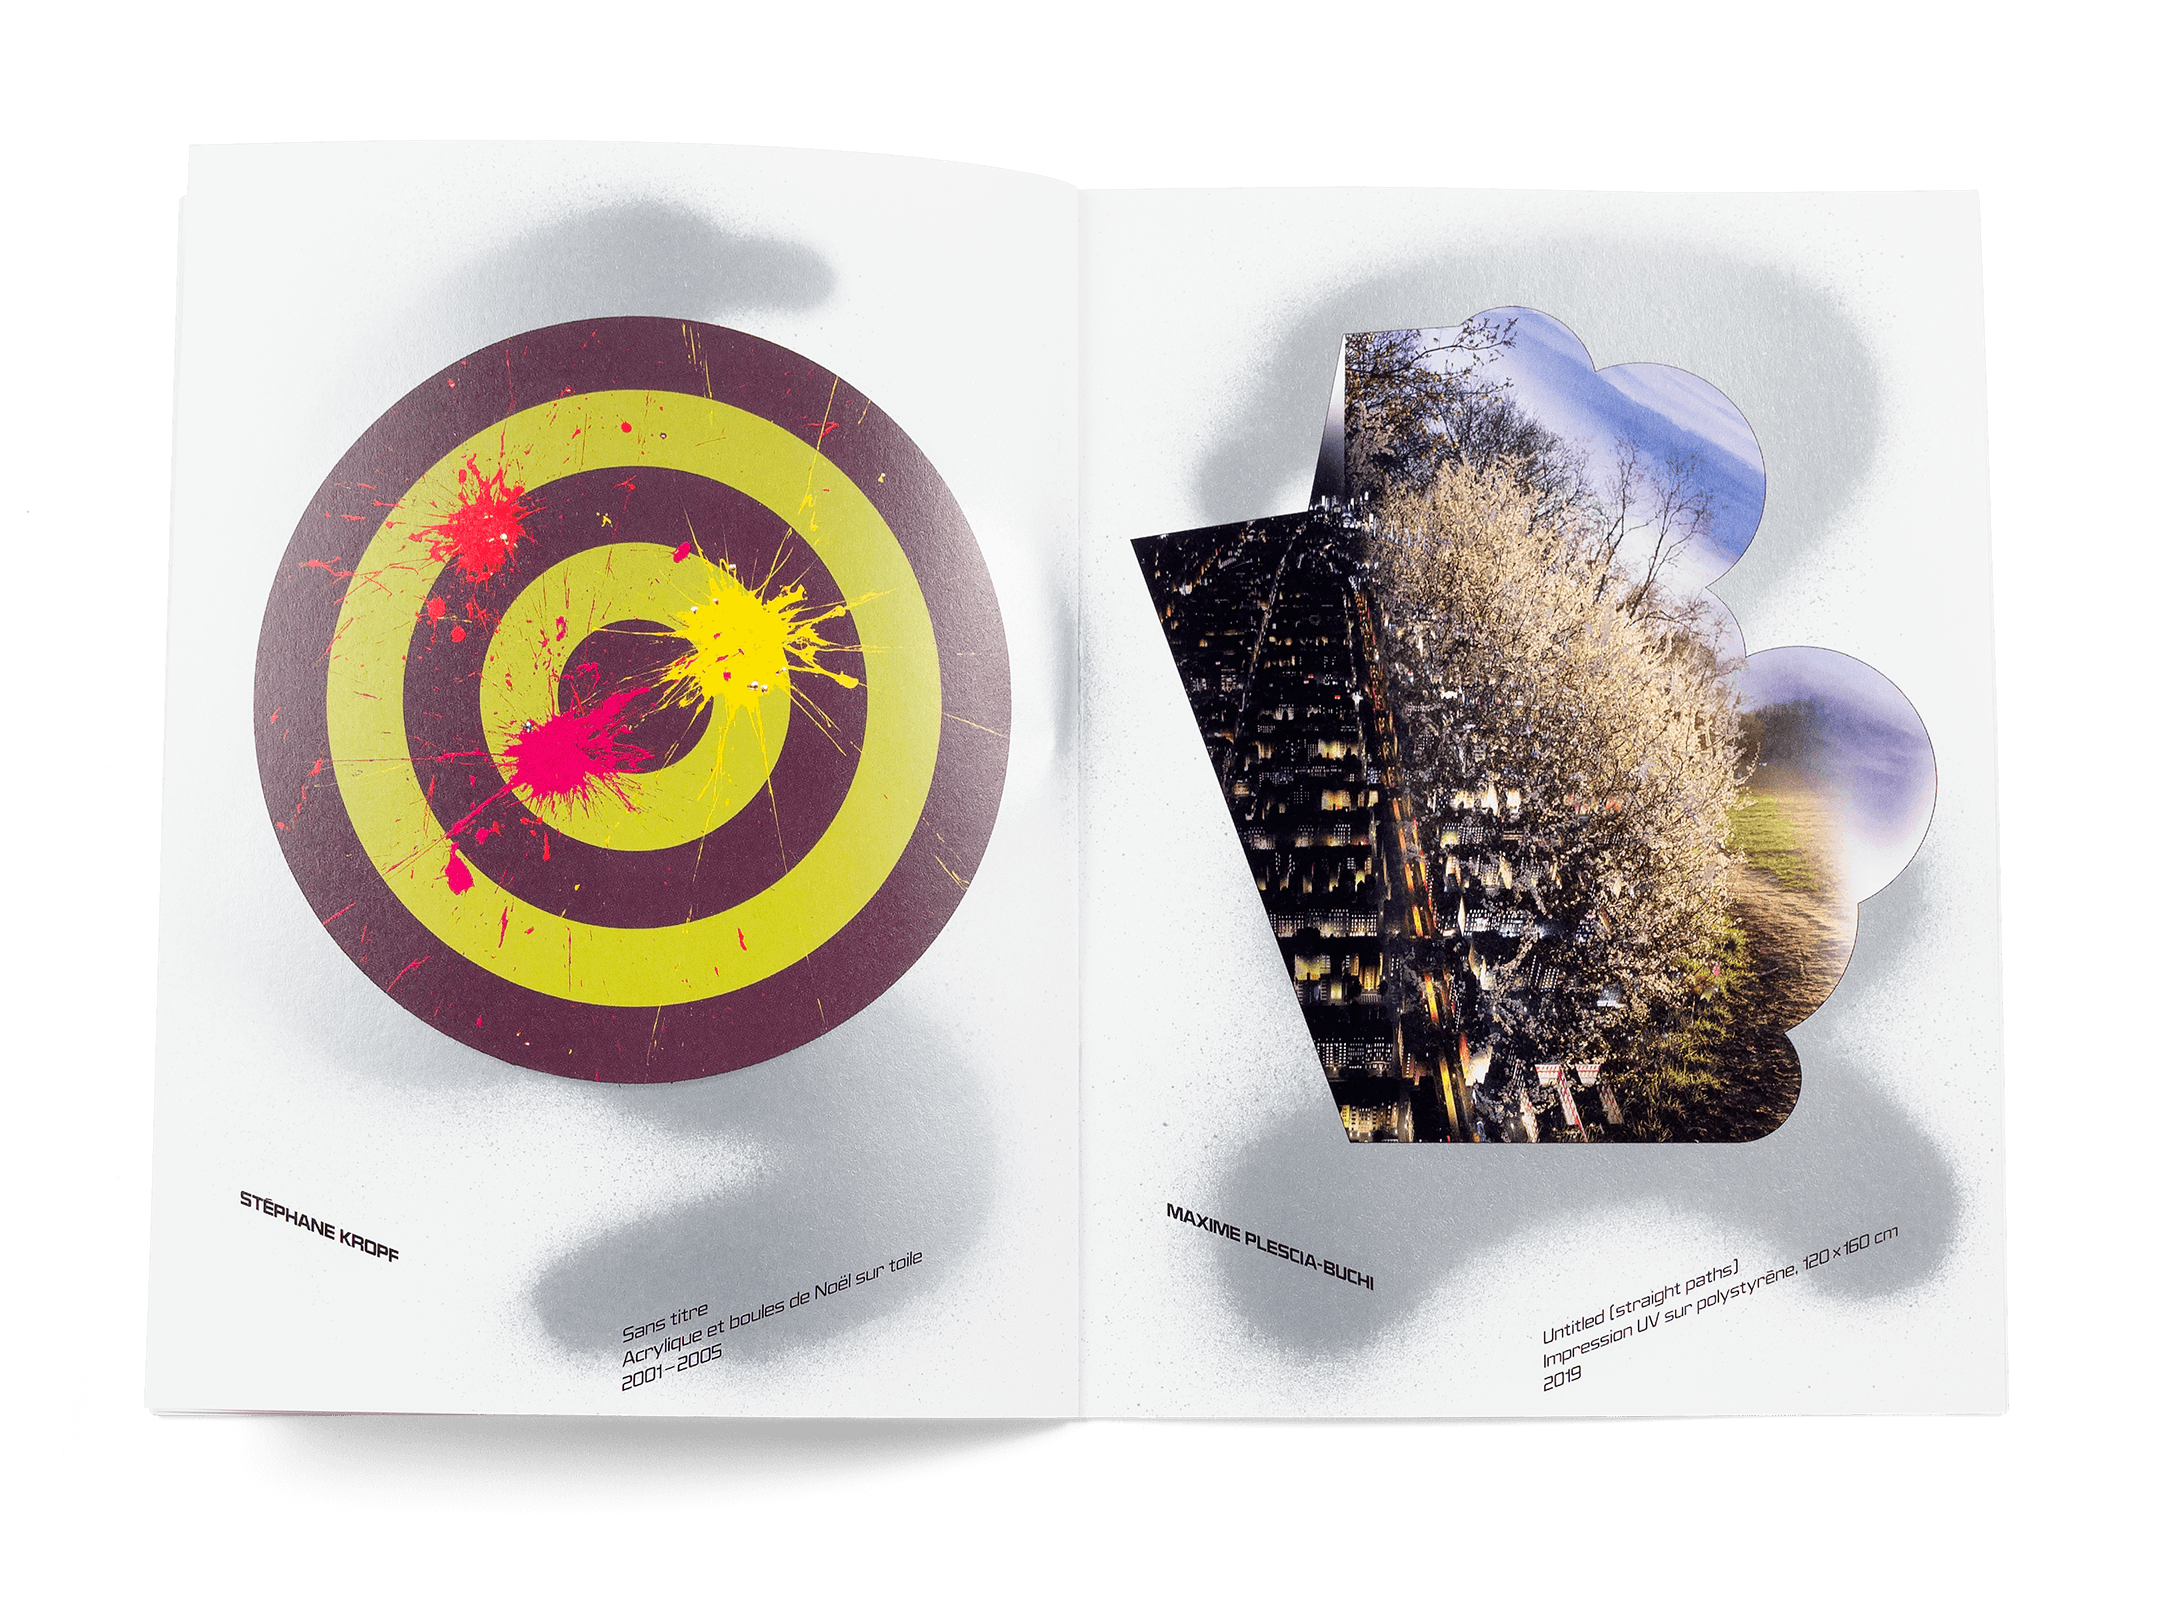 Artworks by Stéphane Kropf and Maxime Büchi in the brochure for Simon Paccaud's exhibition at Ferme de la Chapelle